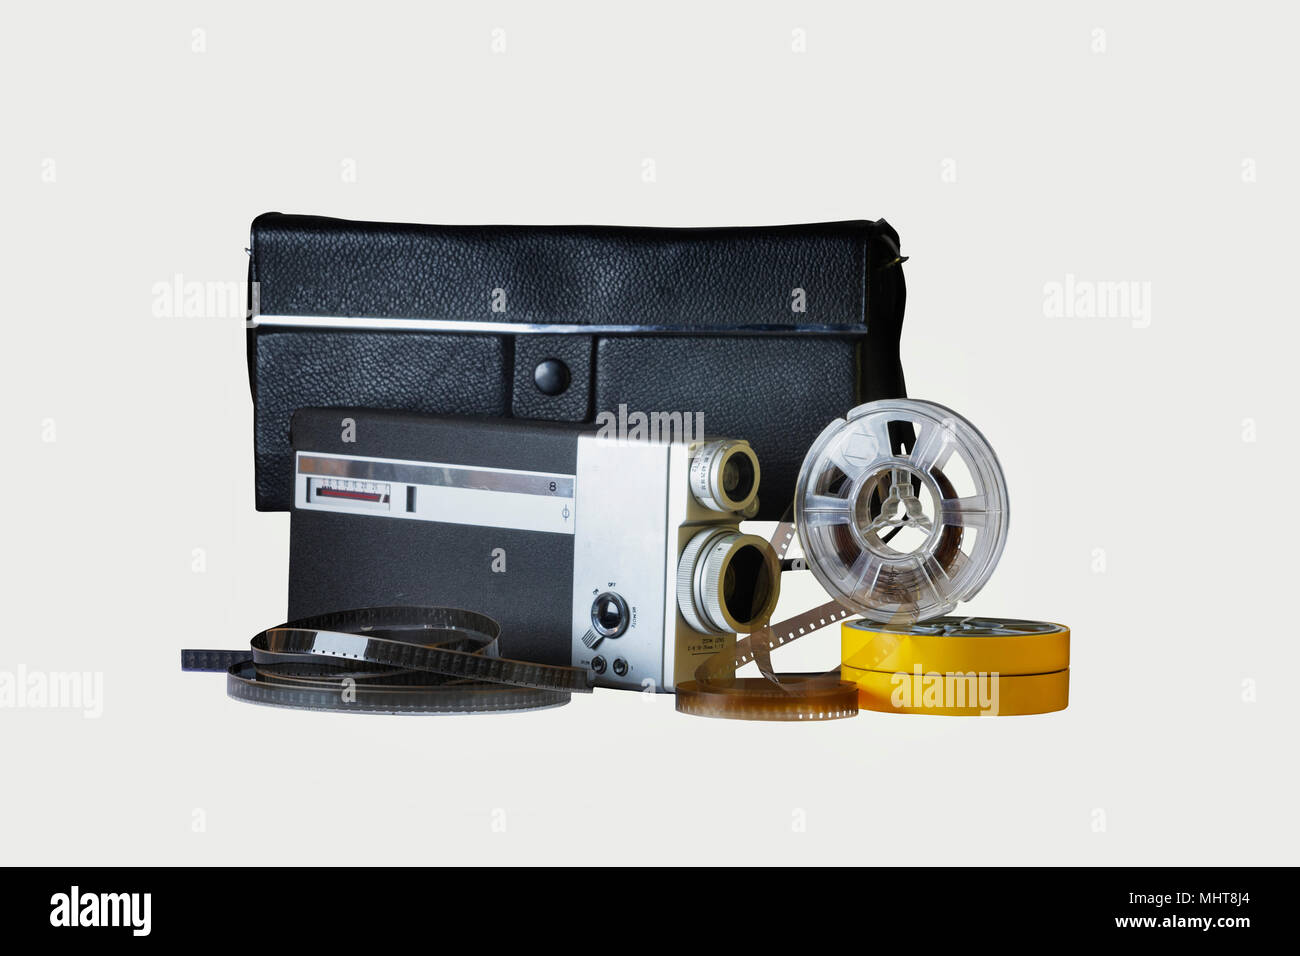 https://c8.alamy.com/comp/MHT8J4/8mm-film-camera-with-its-genuine-black-bag-one-reel-in-vertical-position-and-two-reels-in-their-yellow-holderfilm-strips-between-the-reels-MHT8J4.jpg